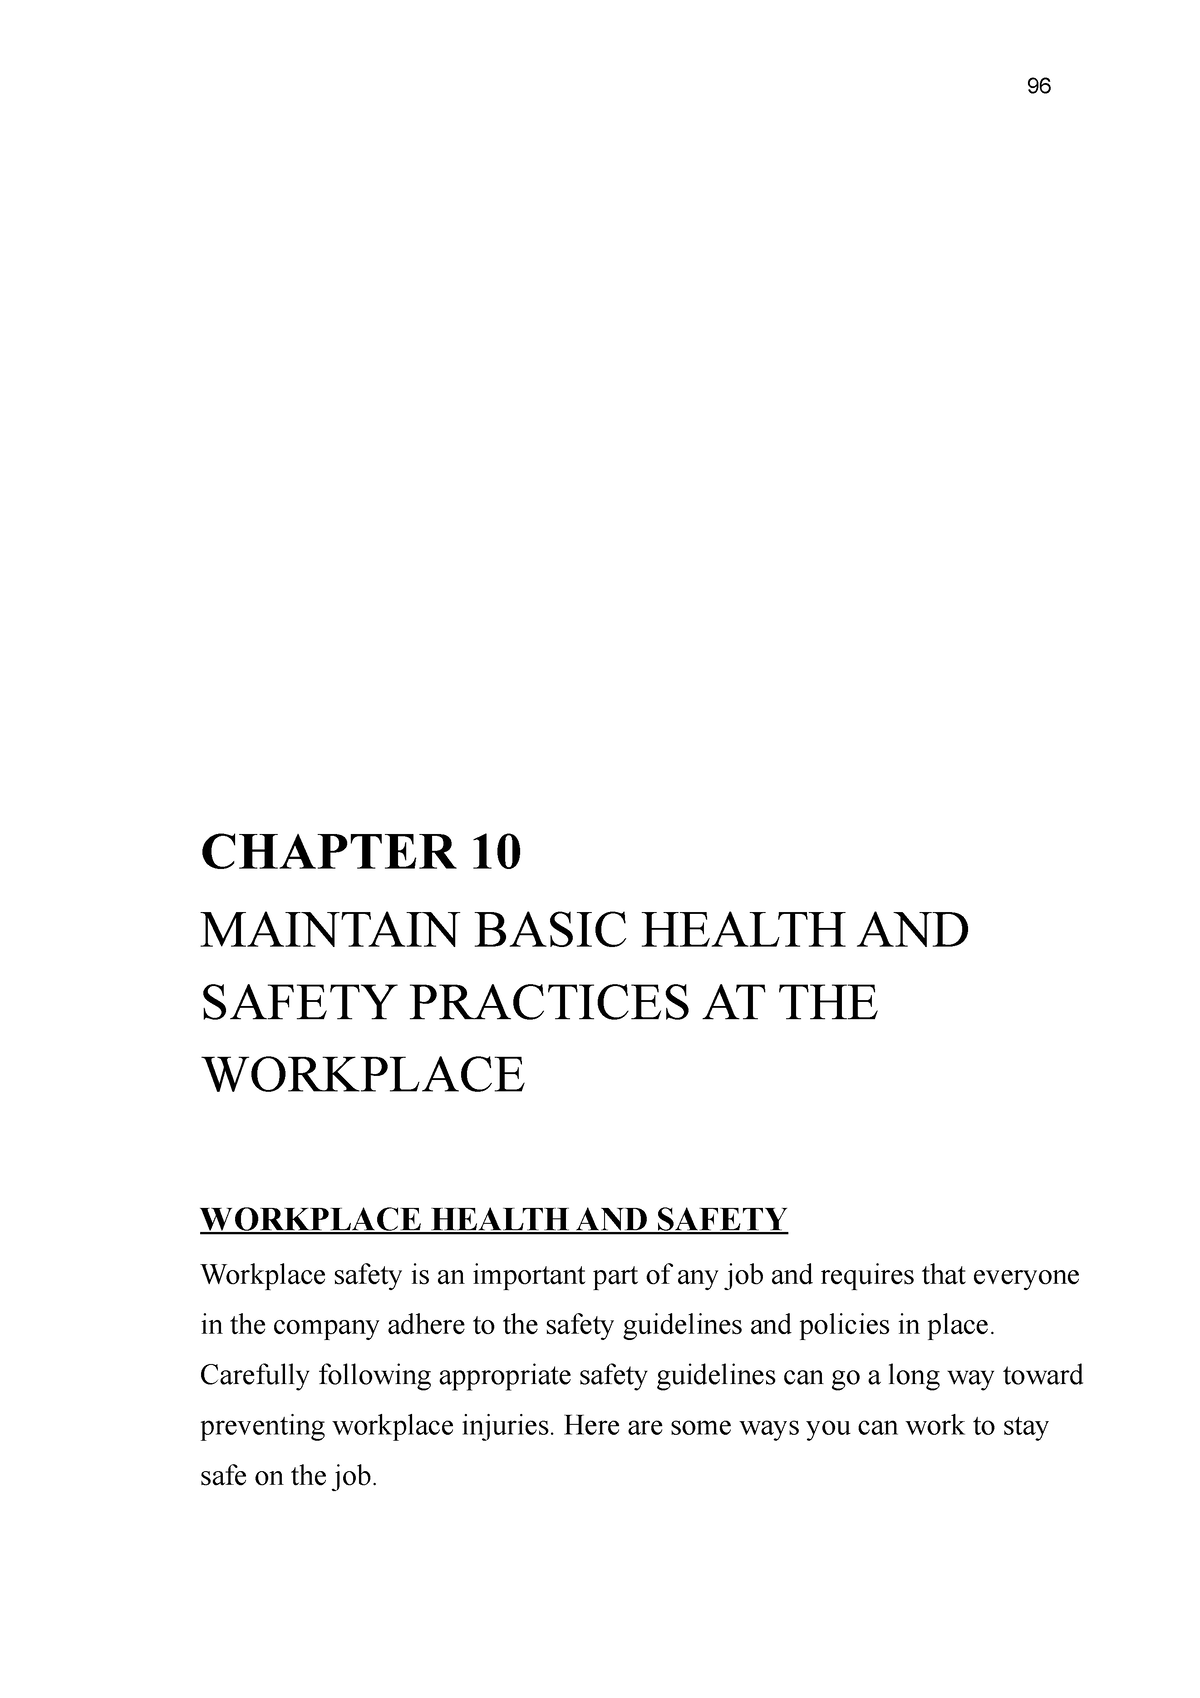 health and safety in the workplace assignment